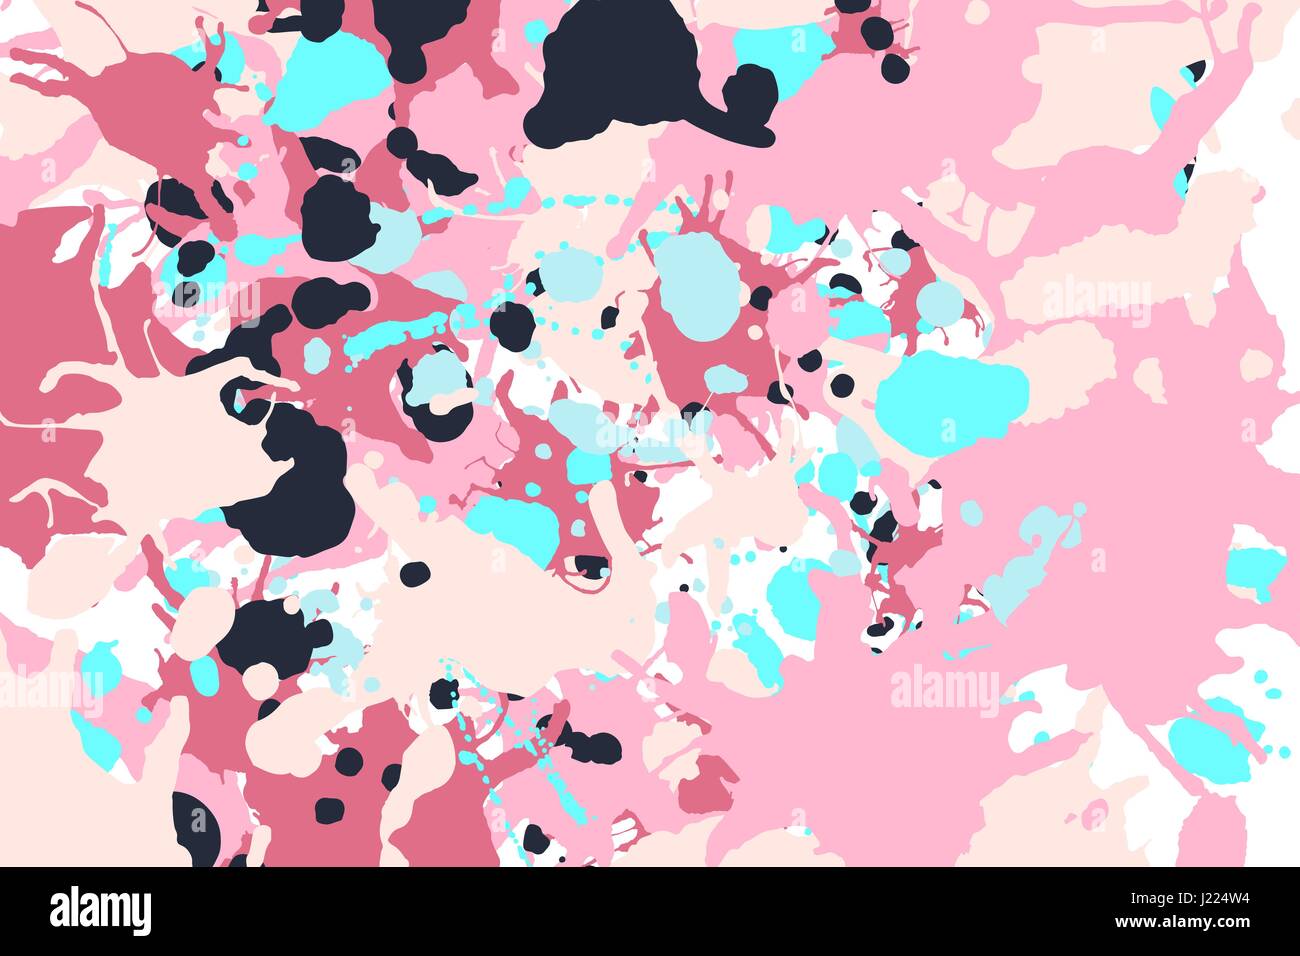 Pink turquoise black ink paint splashes vector colorful background Stock Vector